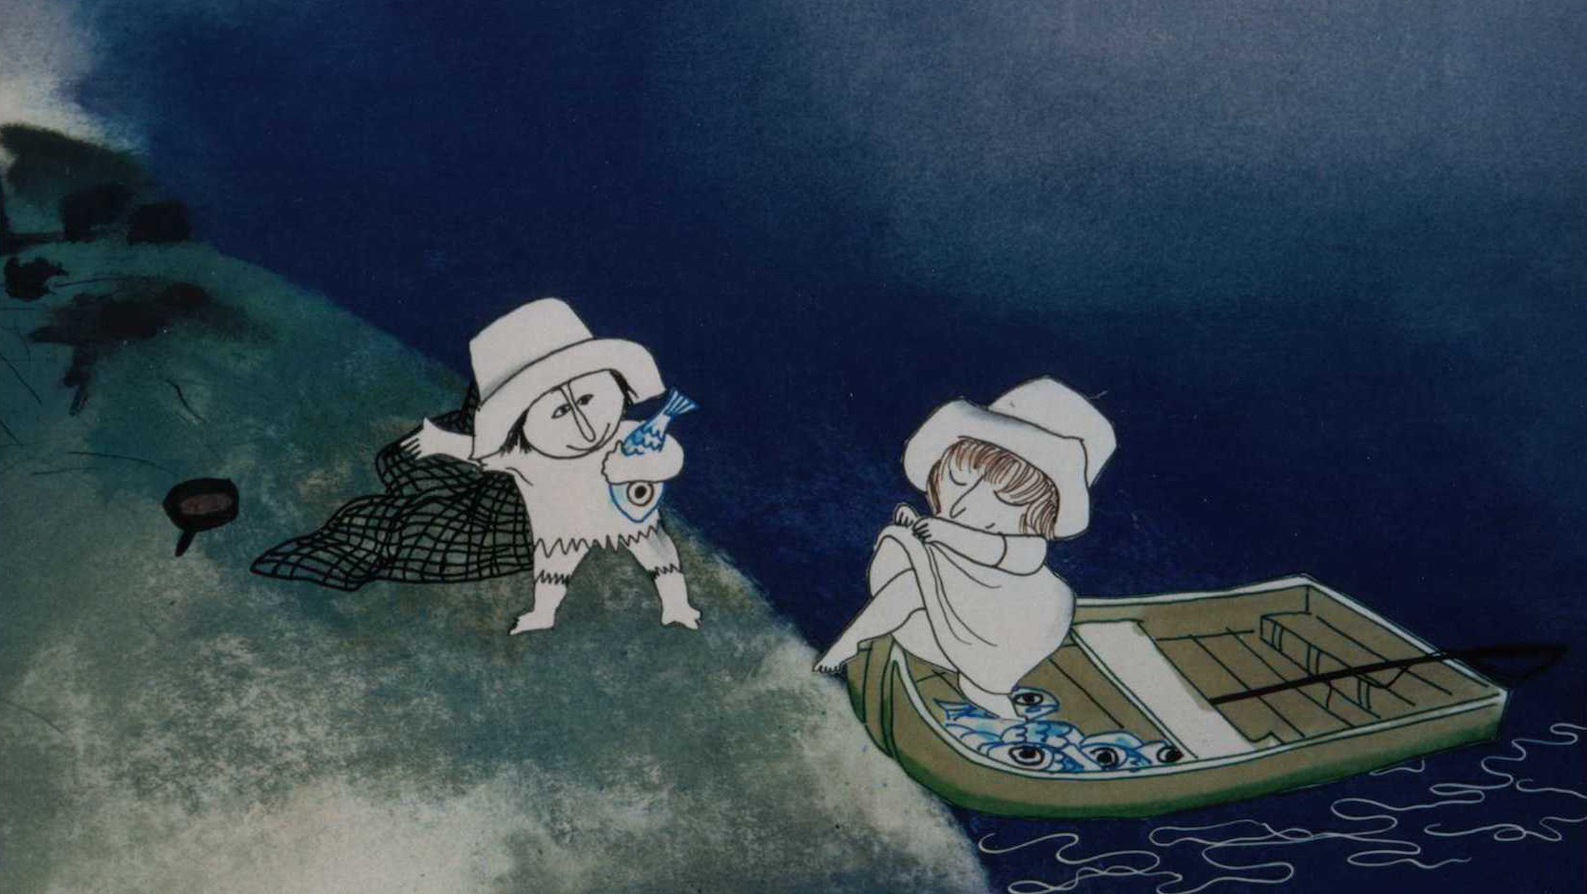 An animated image of two small human figures, the male helping the female figure out of a boat against an evening sky.